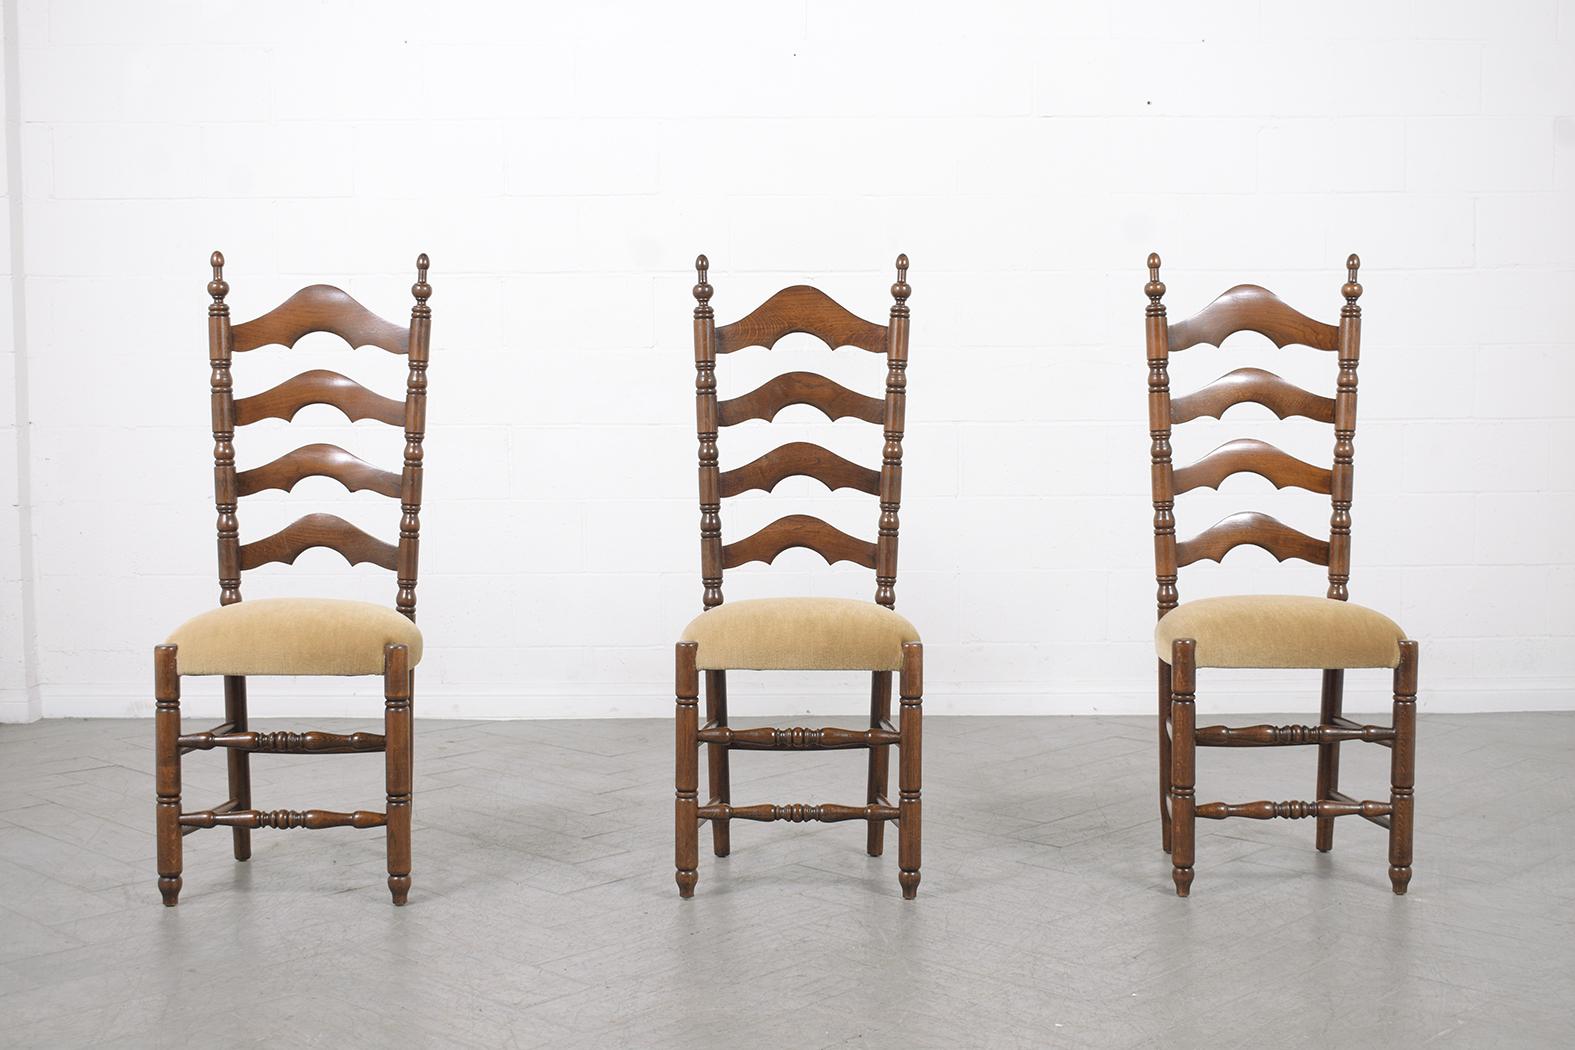 Introducing our exceptional set of six French Provincial Dining Chairs, dating back to the 1900s. These chairs have been meticulously restored and reupholstered by our in-house team of expert craftsmen, ensuring they retain their timeless elegance